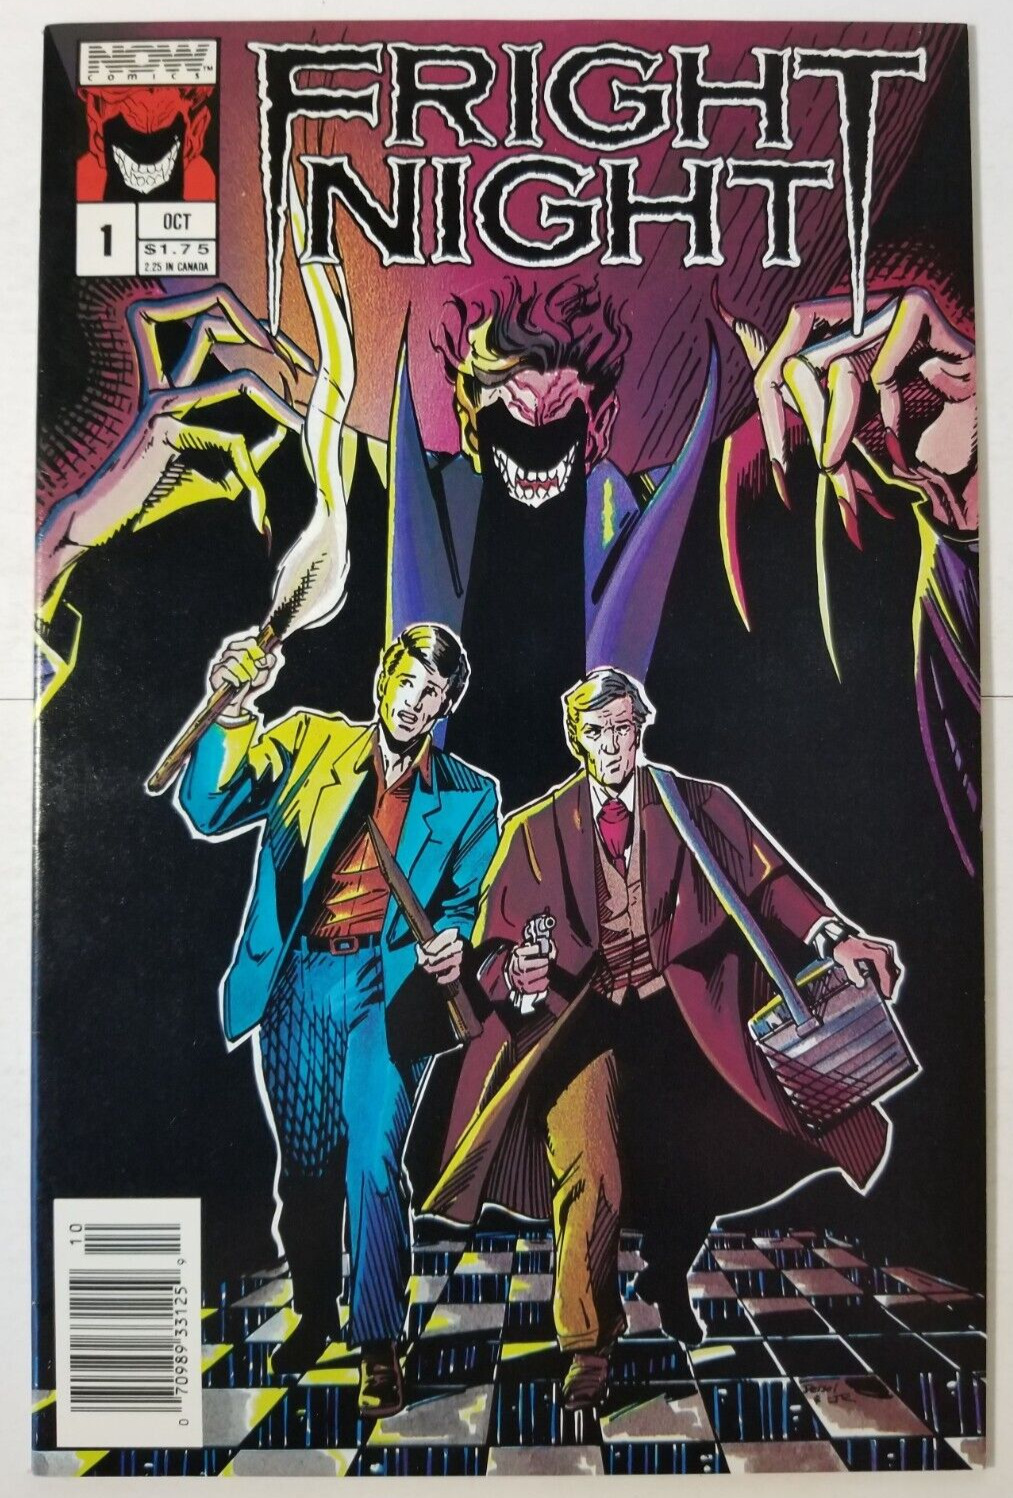 Fright Night issue #1 VF/NM (1988, Now Comics lot) newsstand